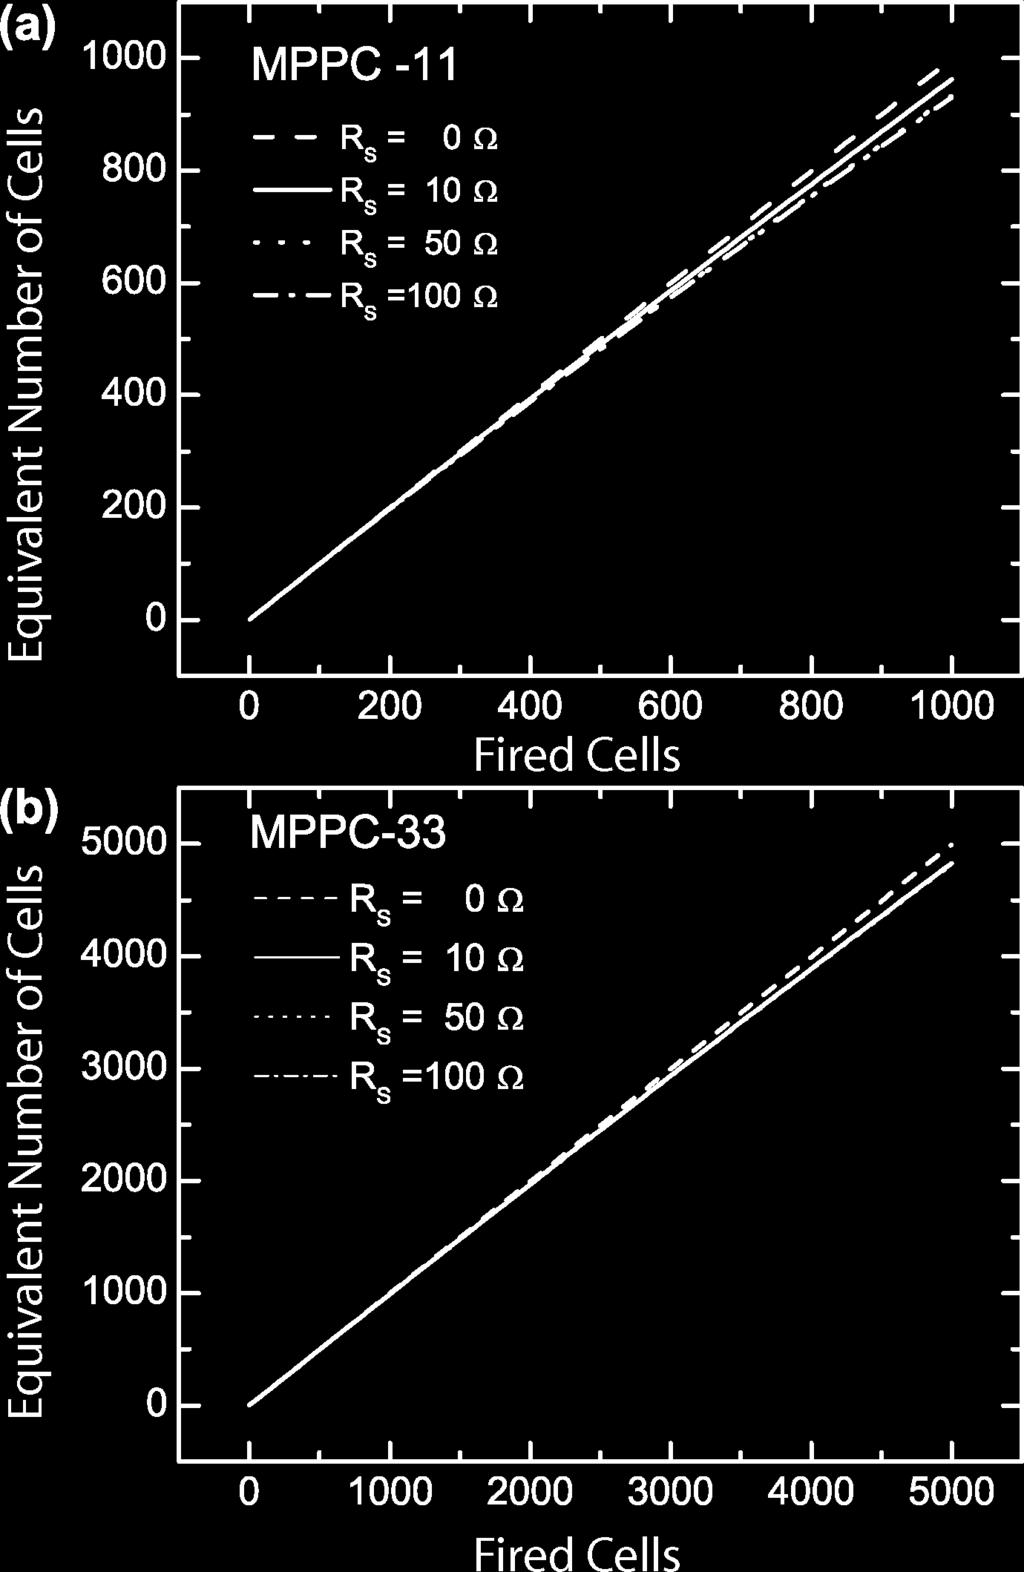 A further prediction of the model concerns the signal generation. The parallel combination of firing microcells leads to a decrease of both and with increasing number of fired cells.